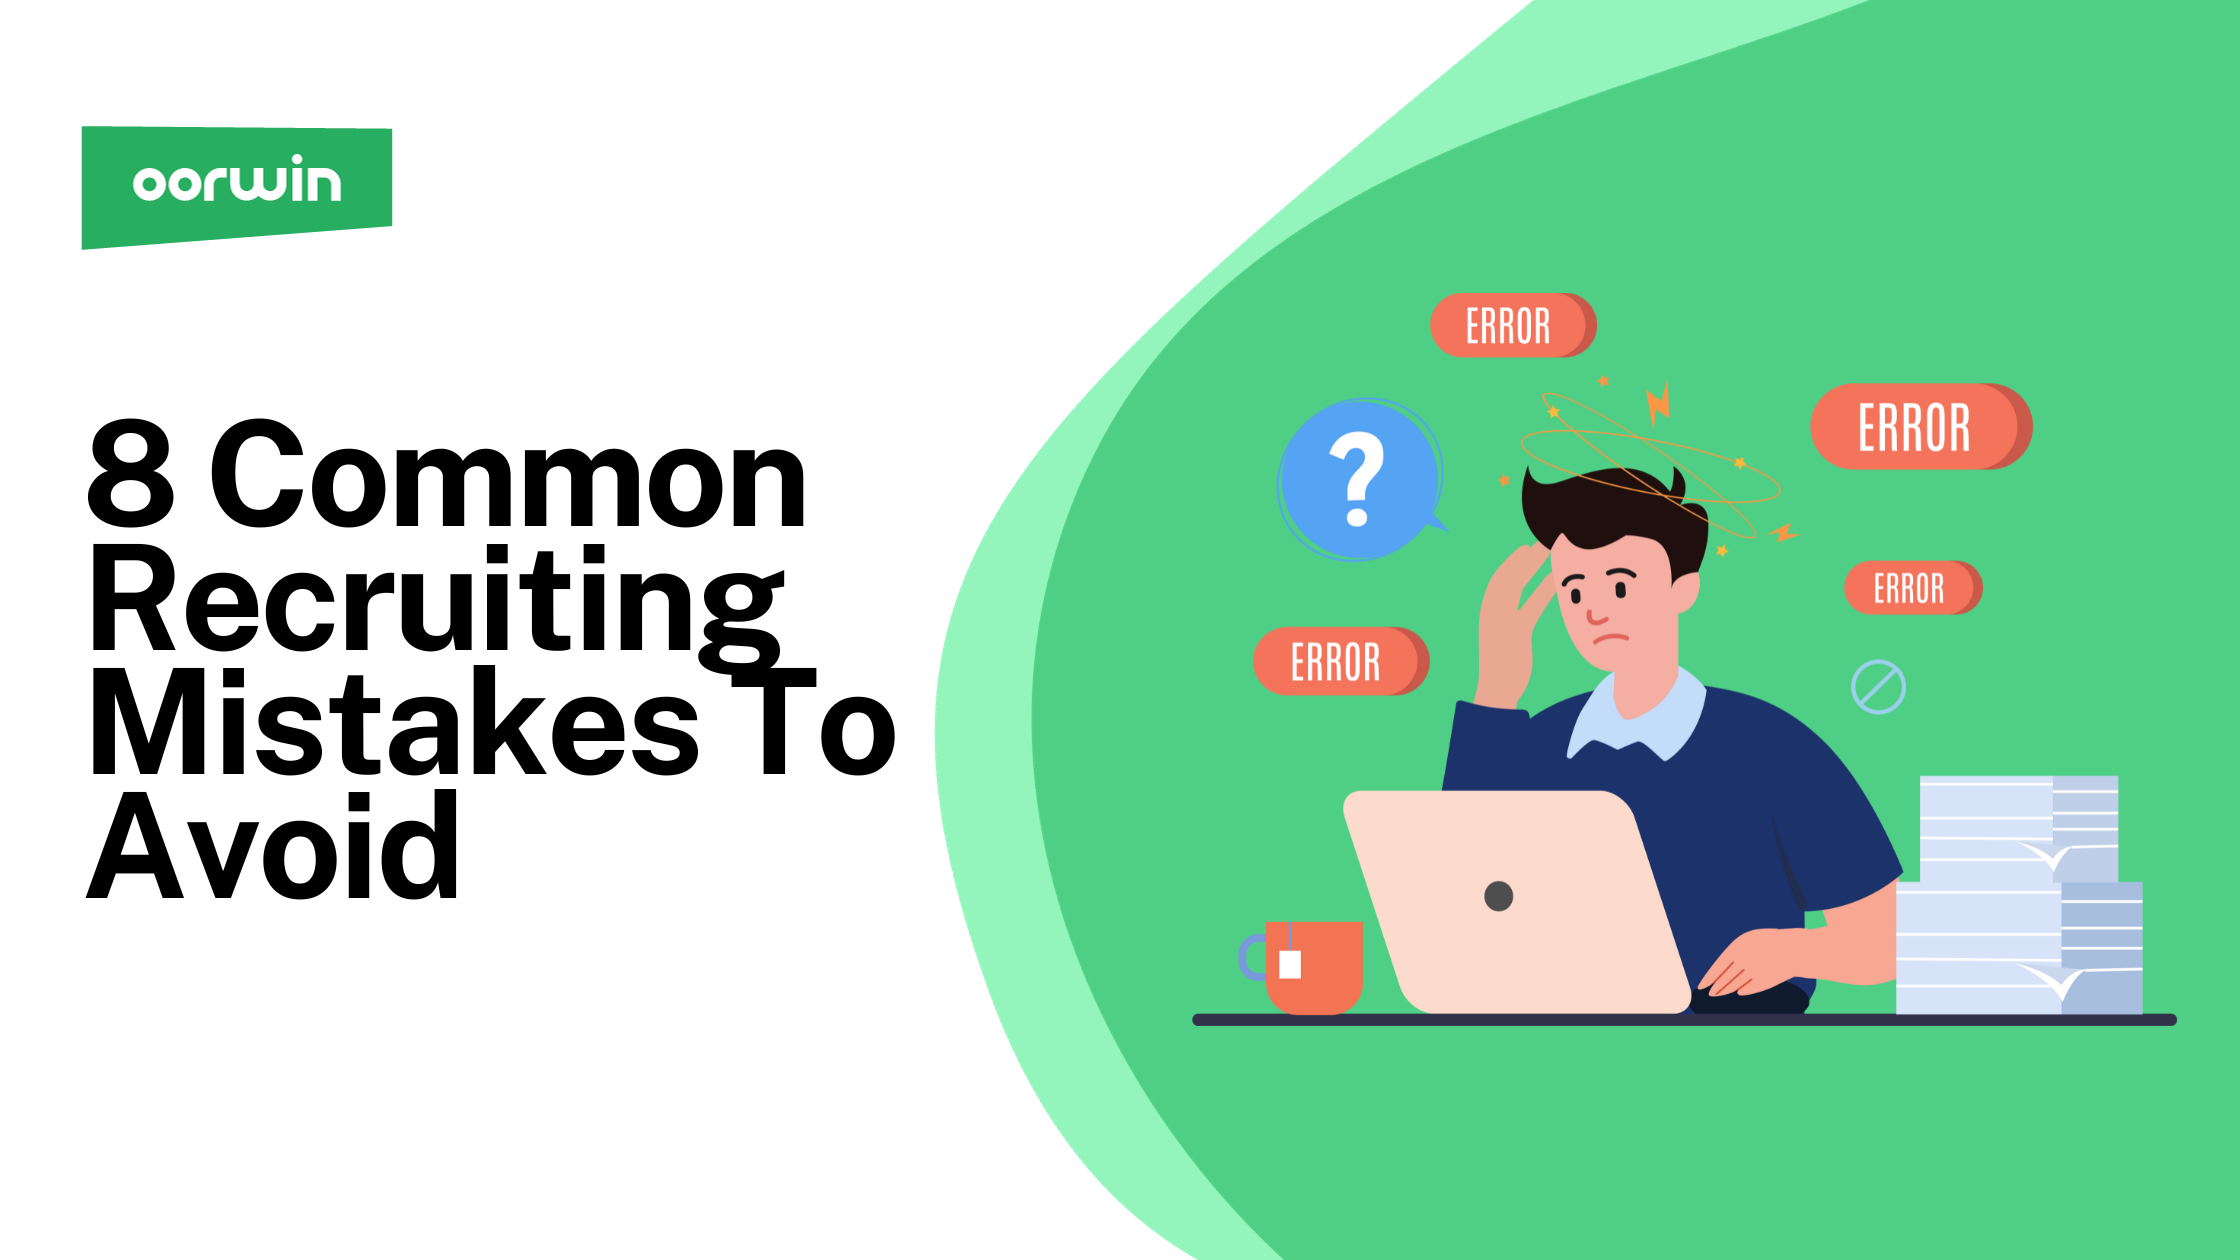 8 Common Recruiting Mistakes To Avoid